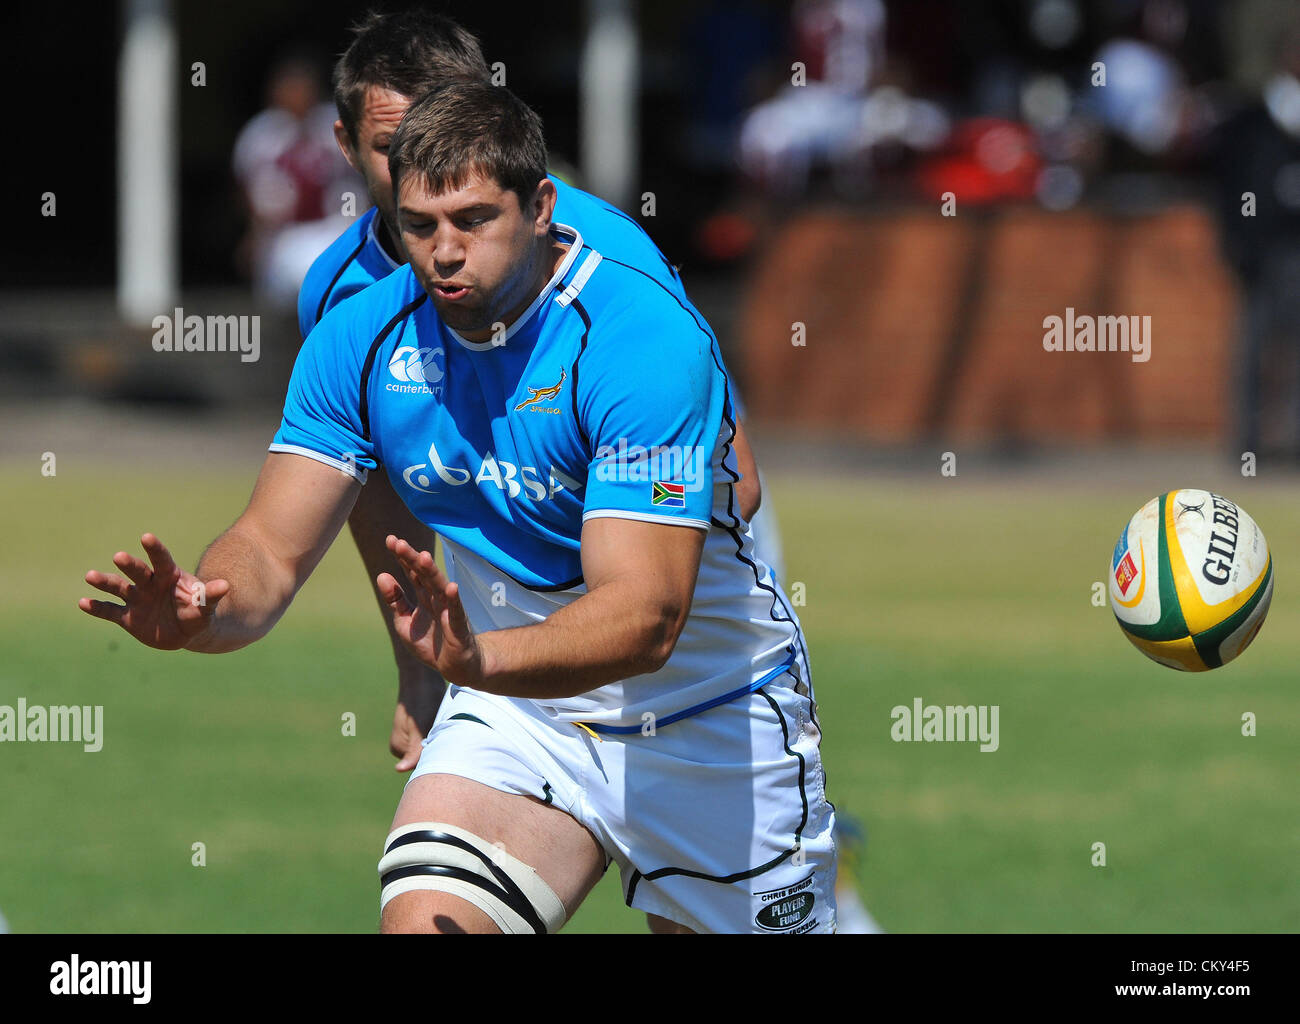 JOHANNESBURG, SOUTH AFRICA - SEPTEMBER 01, Willem Alberts runs as dummy receiver during the South African national rugby team field session and media conference at KES on September 01, 2012 in Johannesburg, South Africa Photo by Duif du Toit / Gallo Images Stock Photo